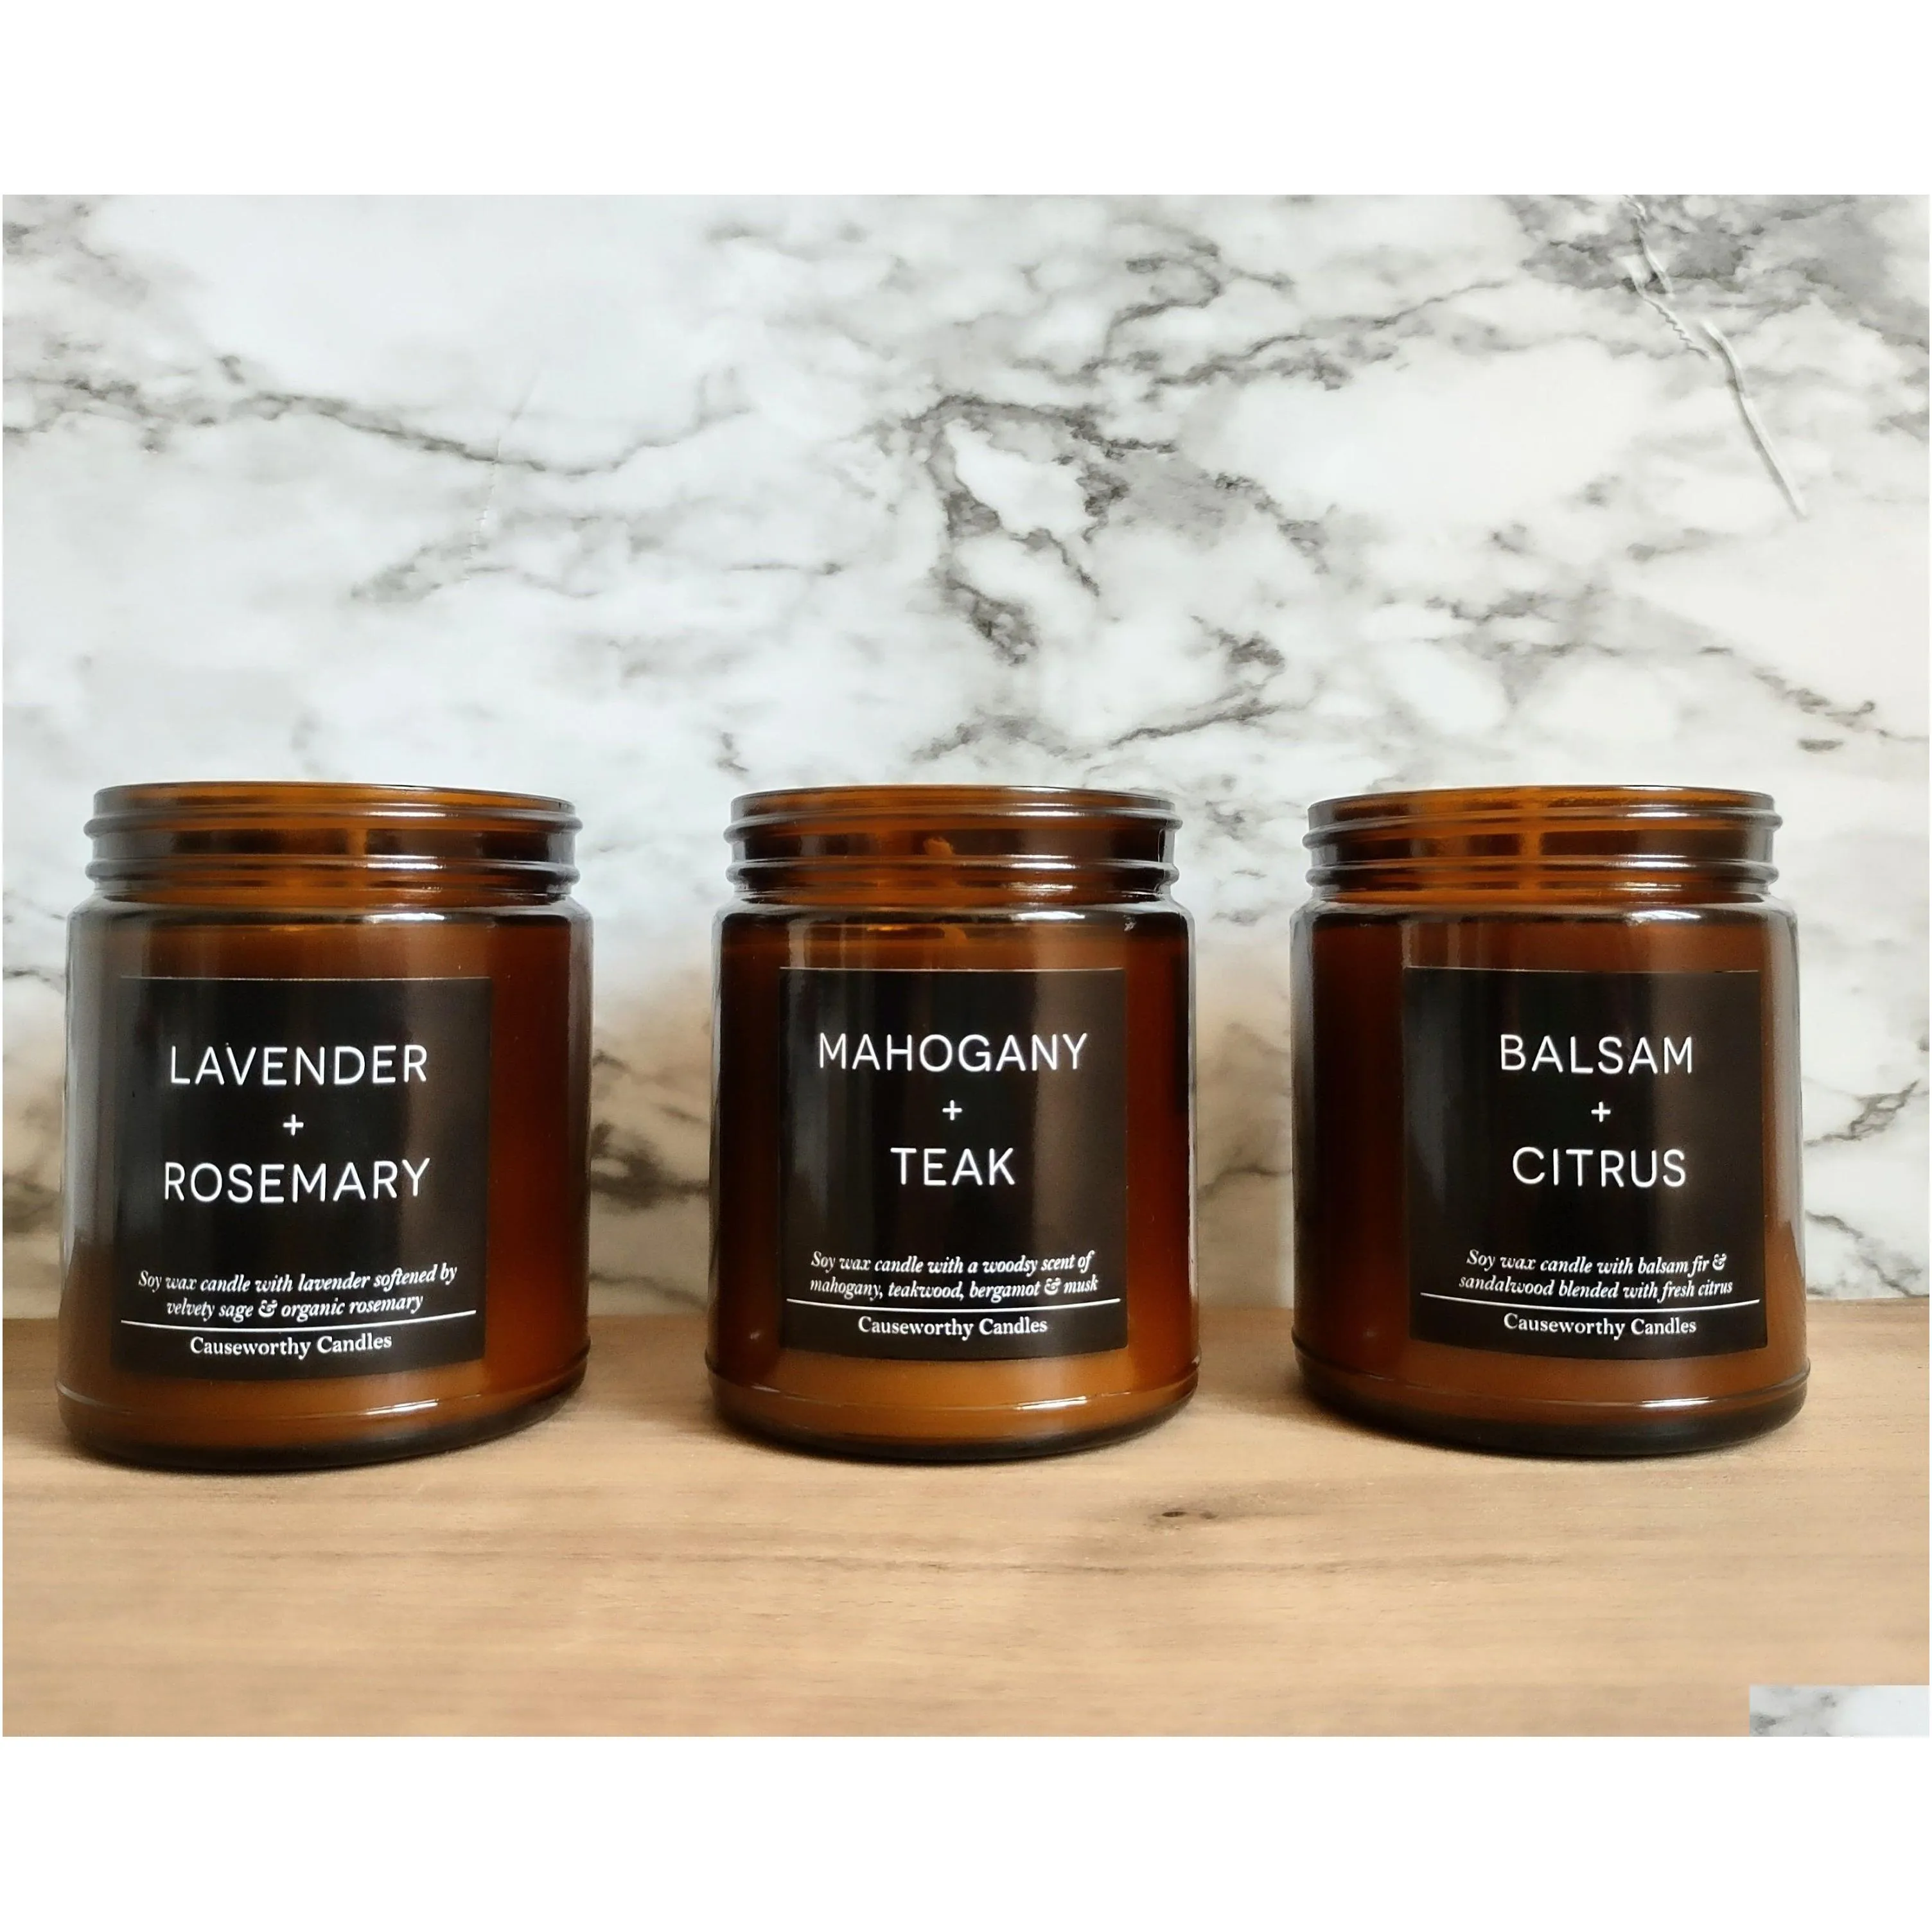 high quality - clean burning - handcrafted - non-toxic - glass jars - causeworthy candles